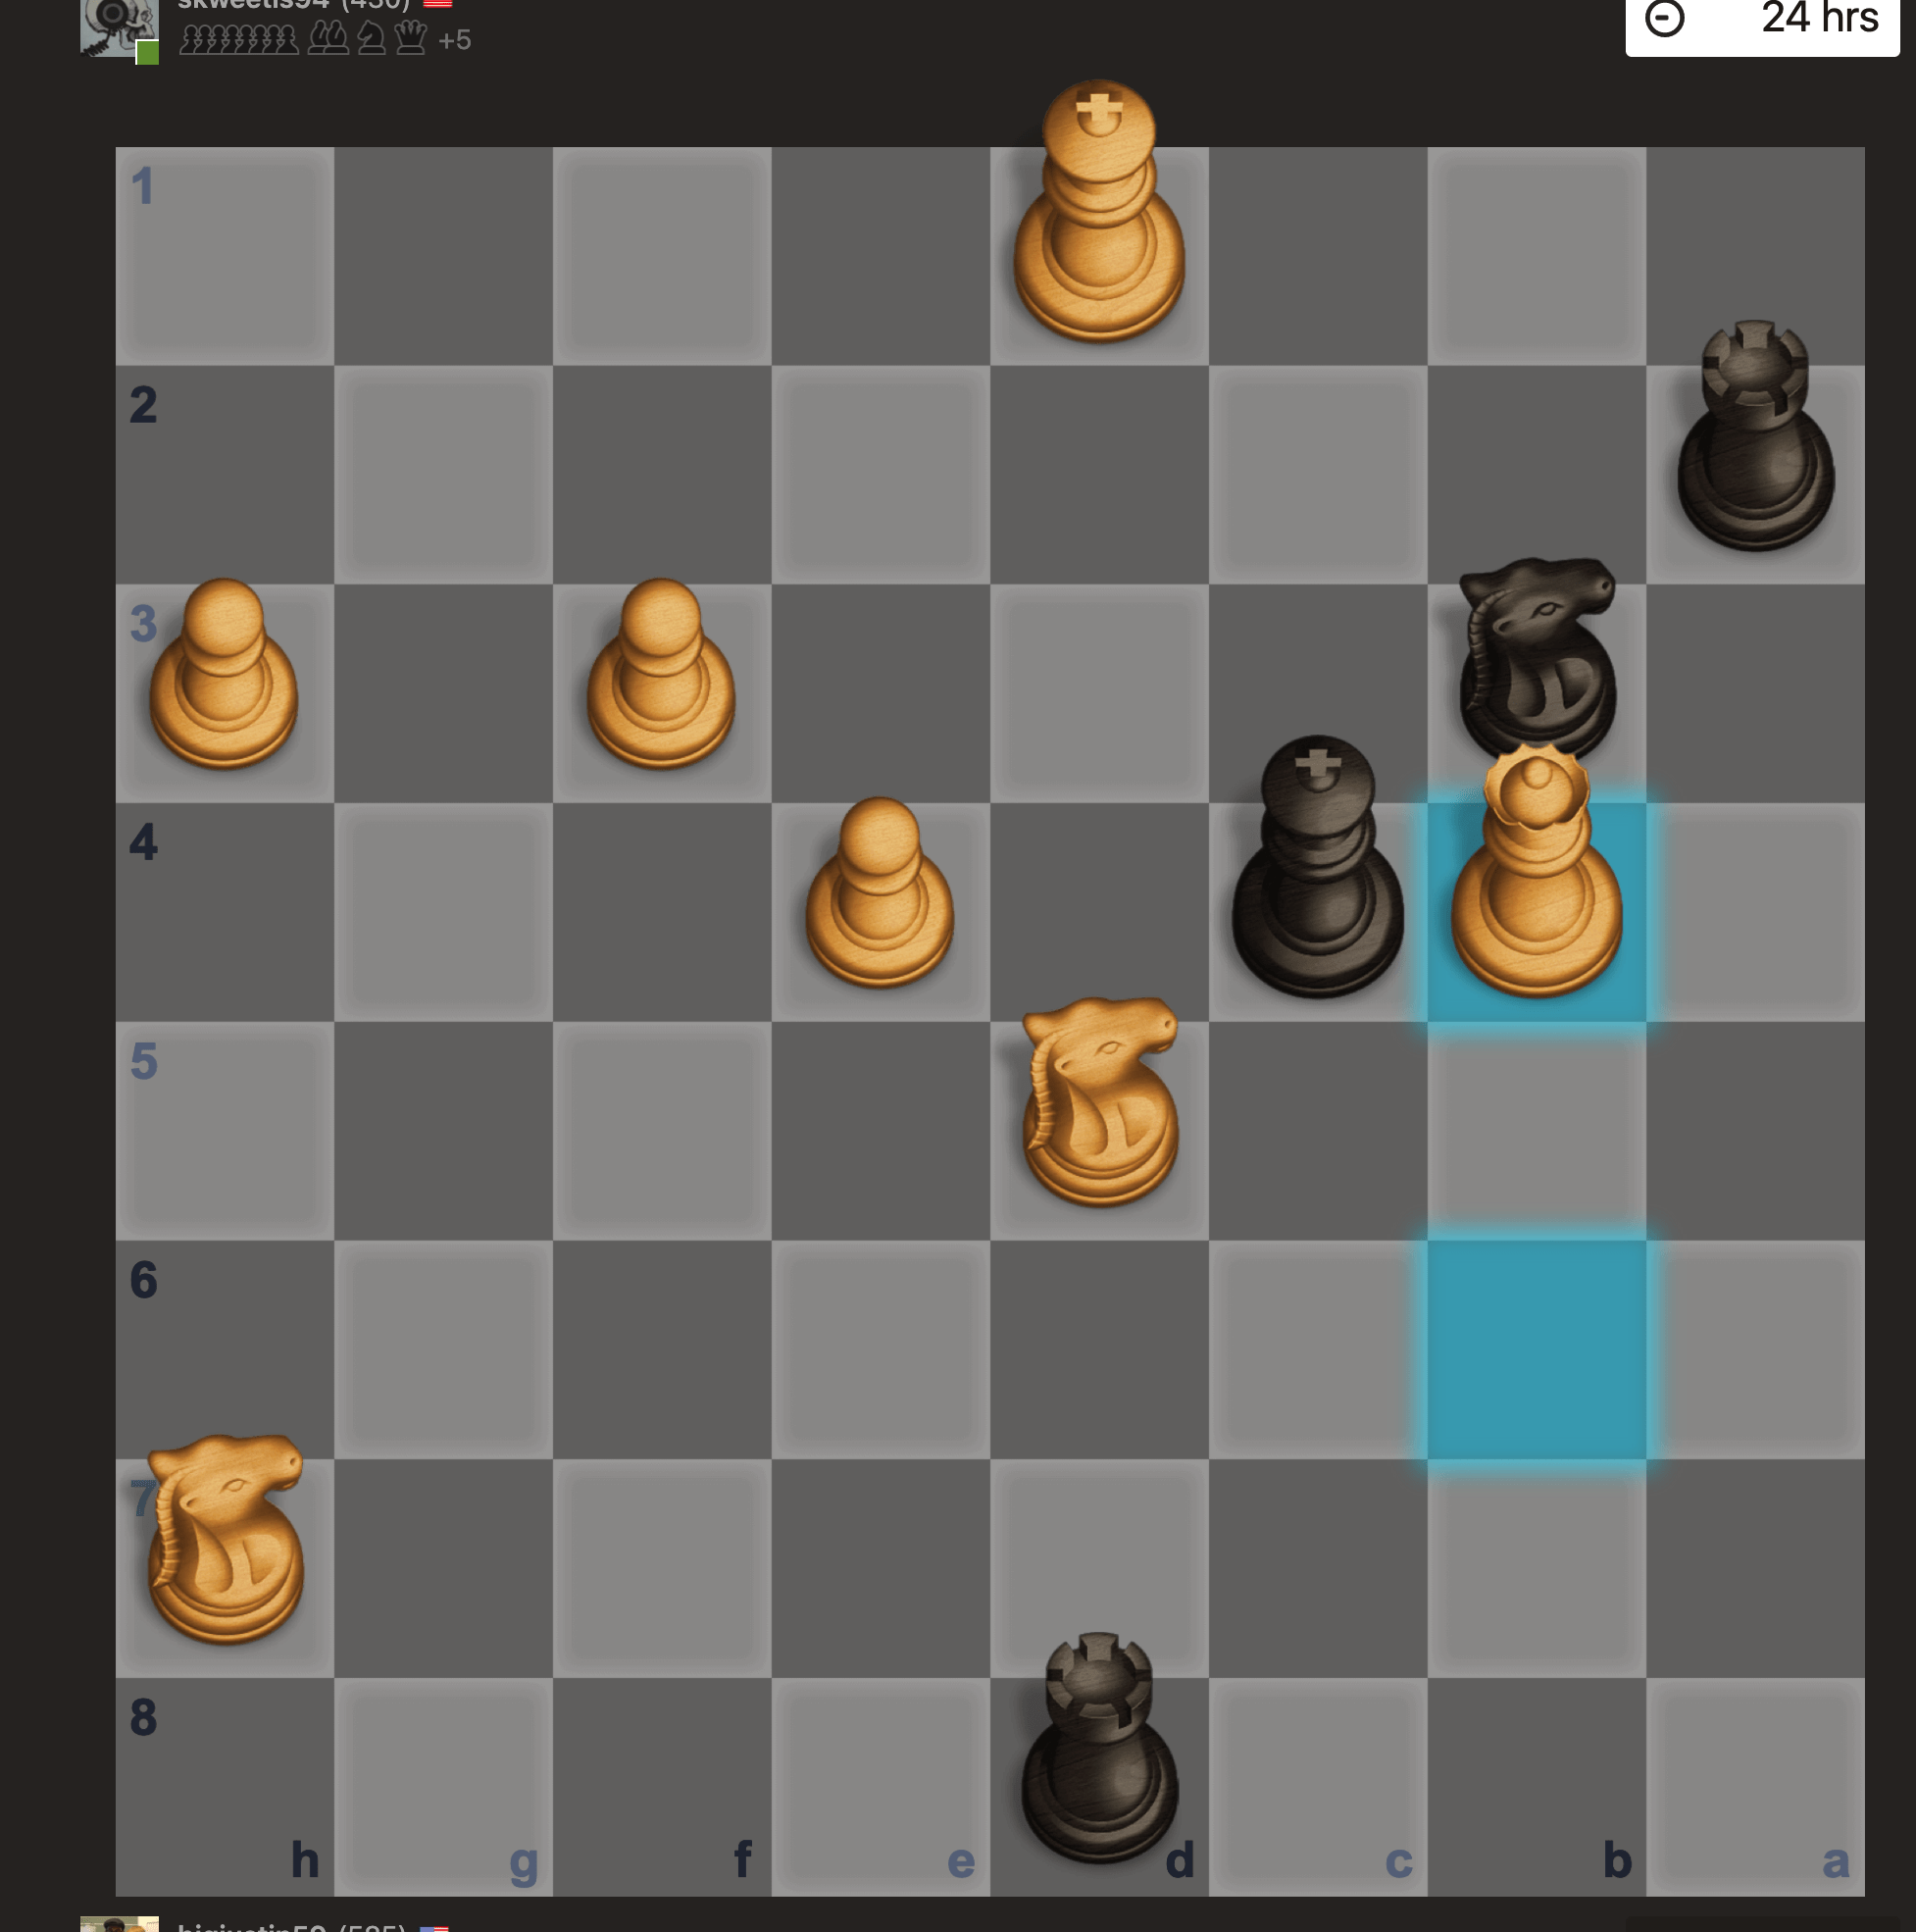 Help me understand why Black can't use the King capture the Queen